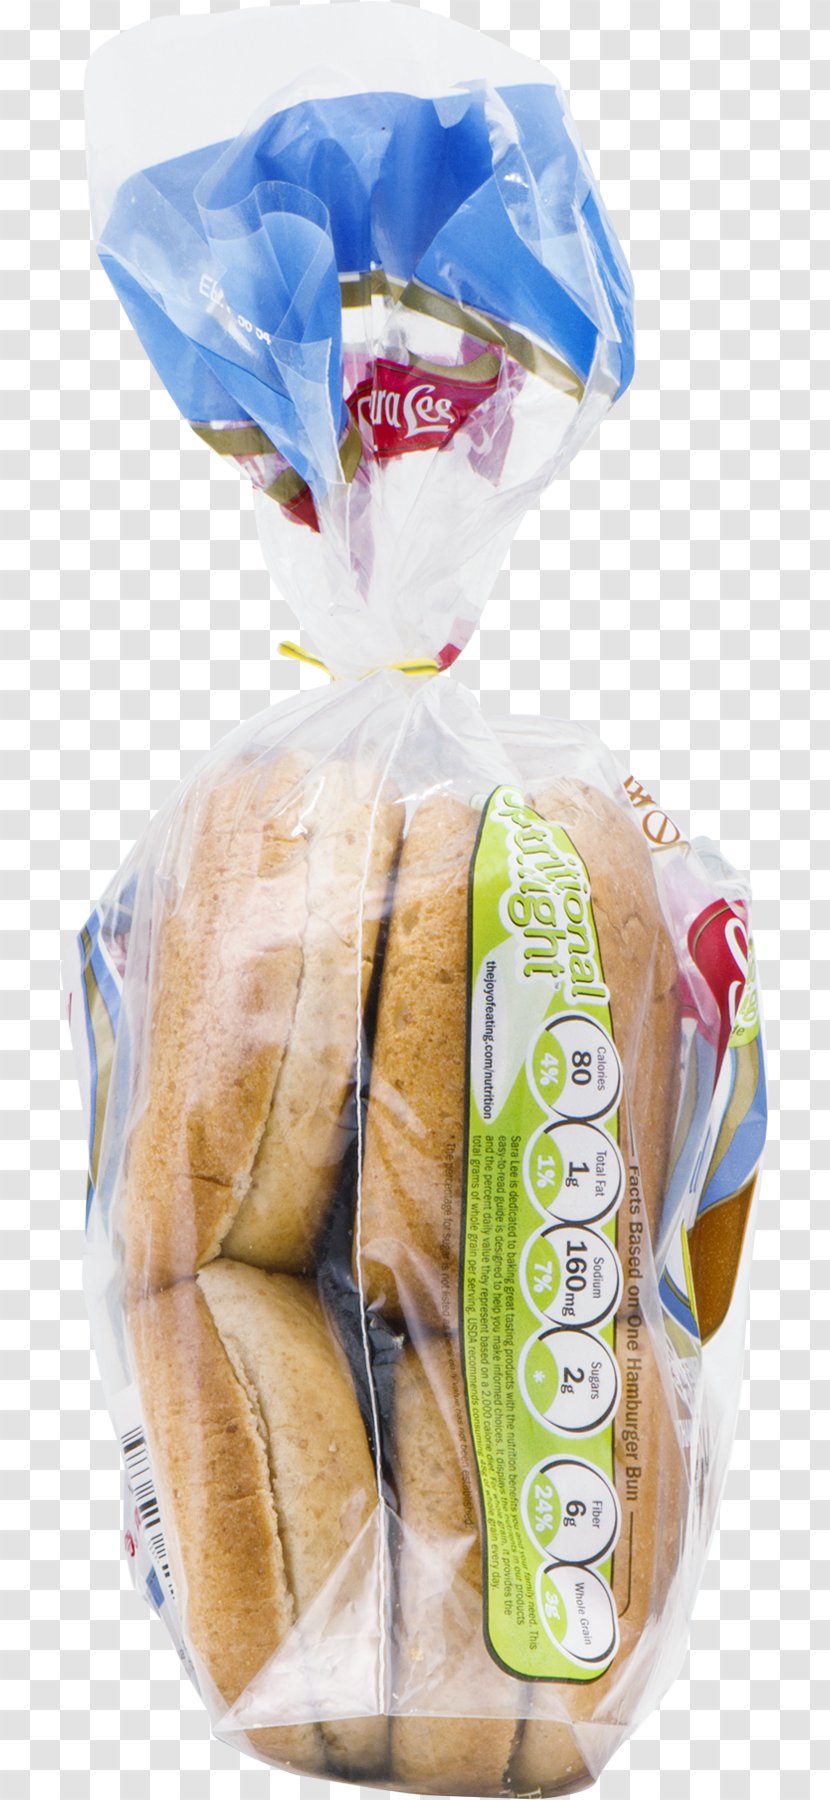 Junk Food Snack - Whole Wheat Bread Transparent PNG